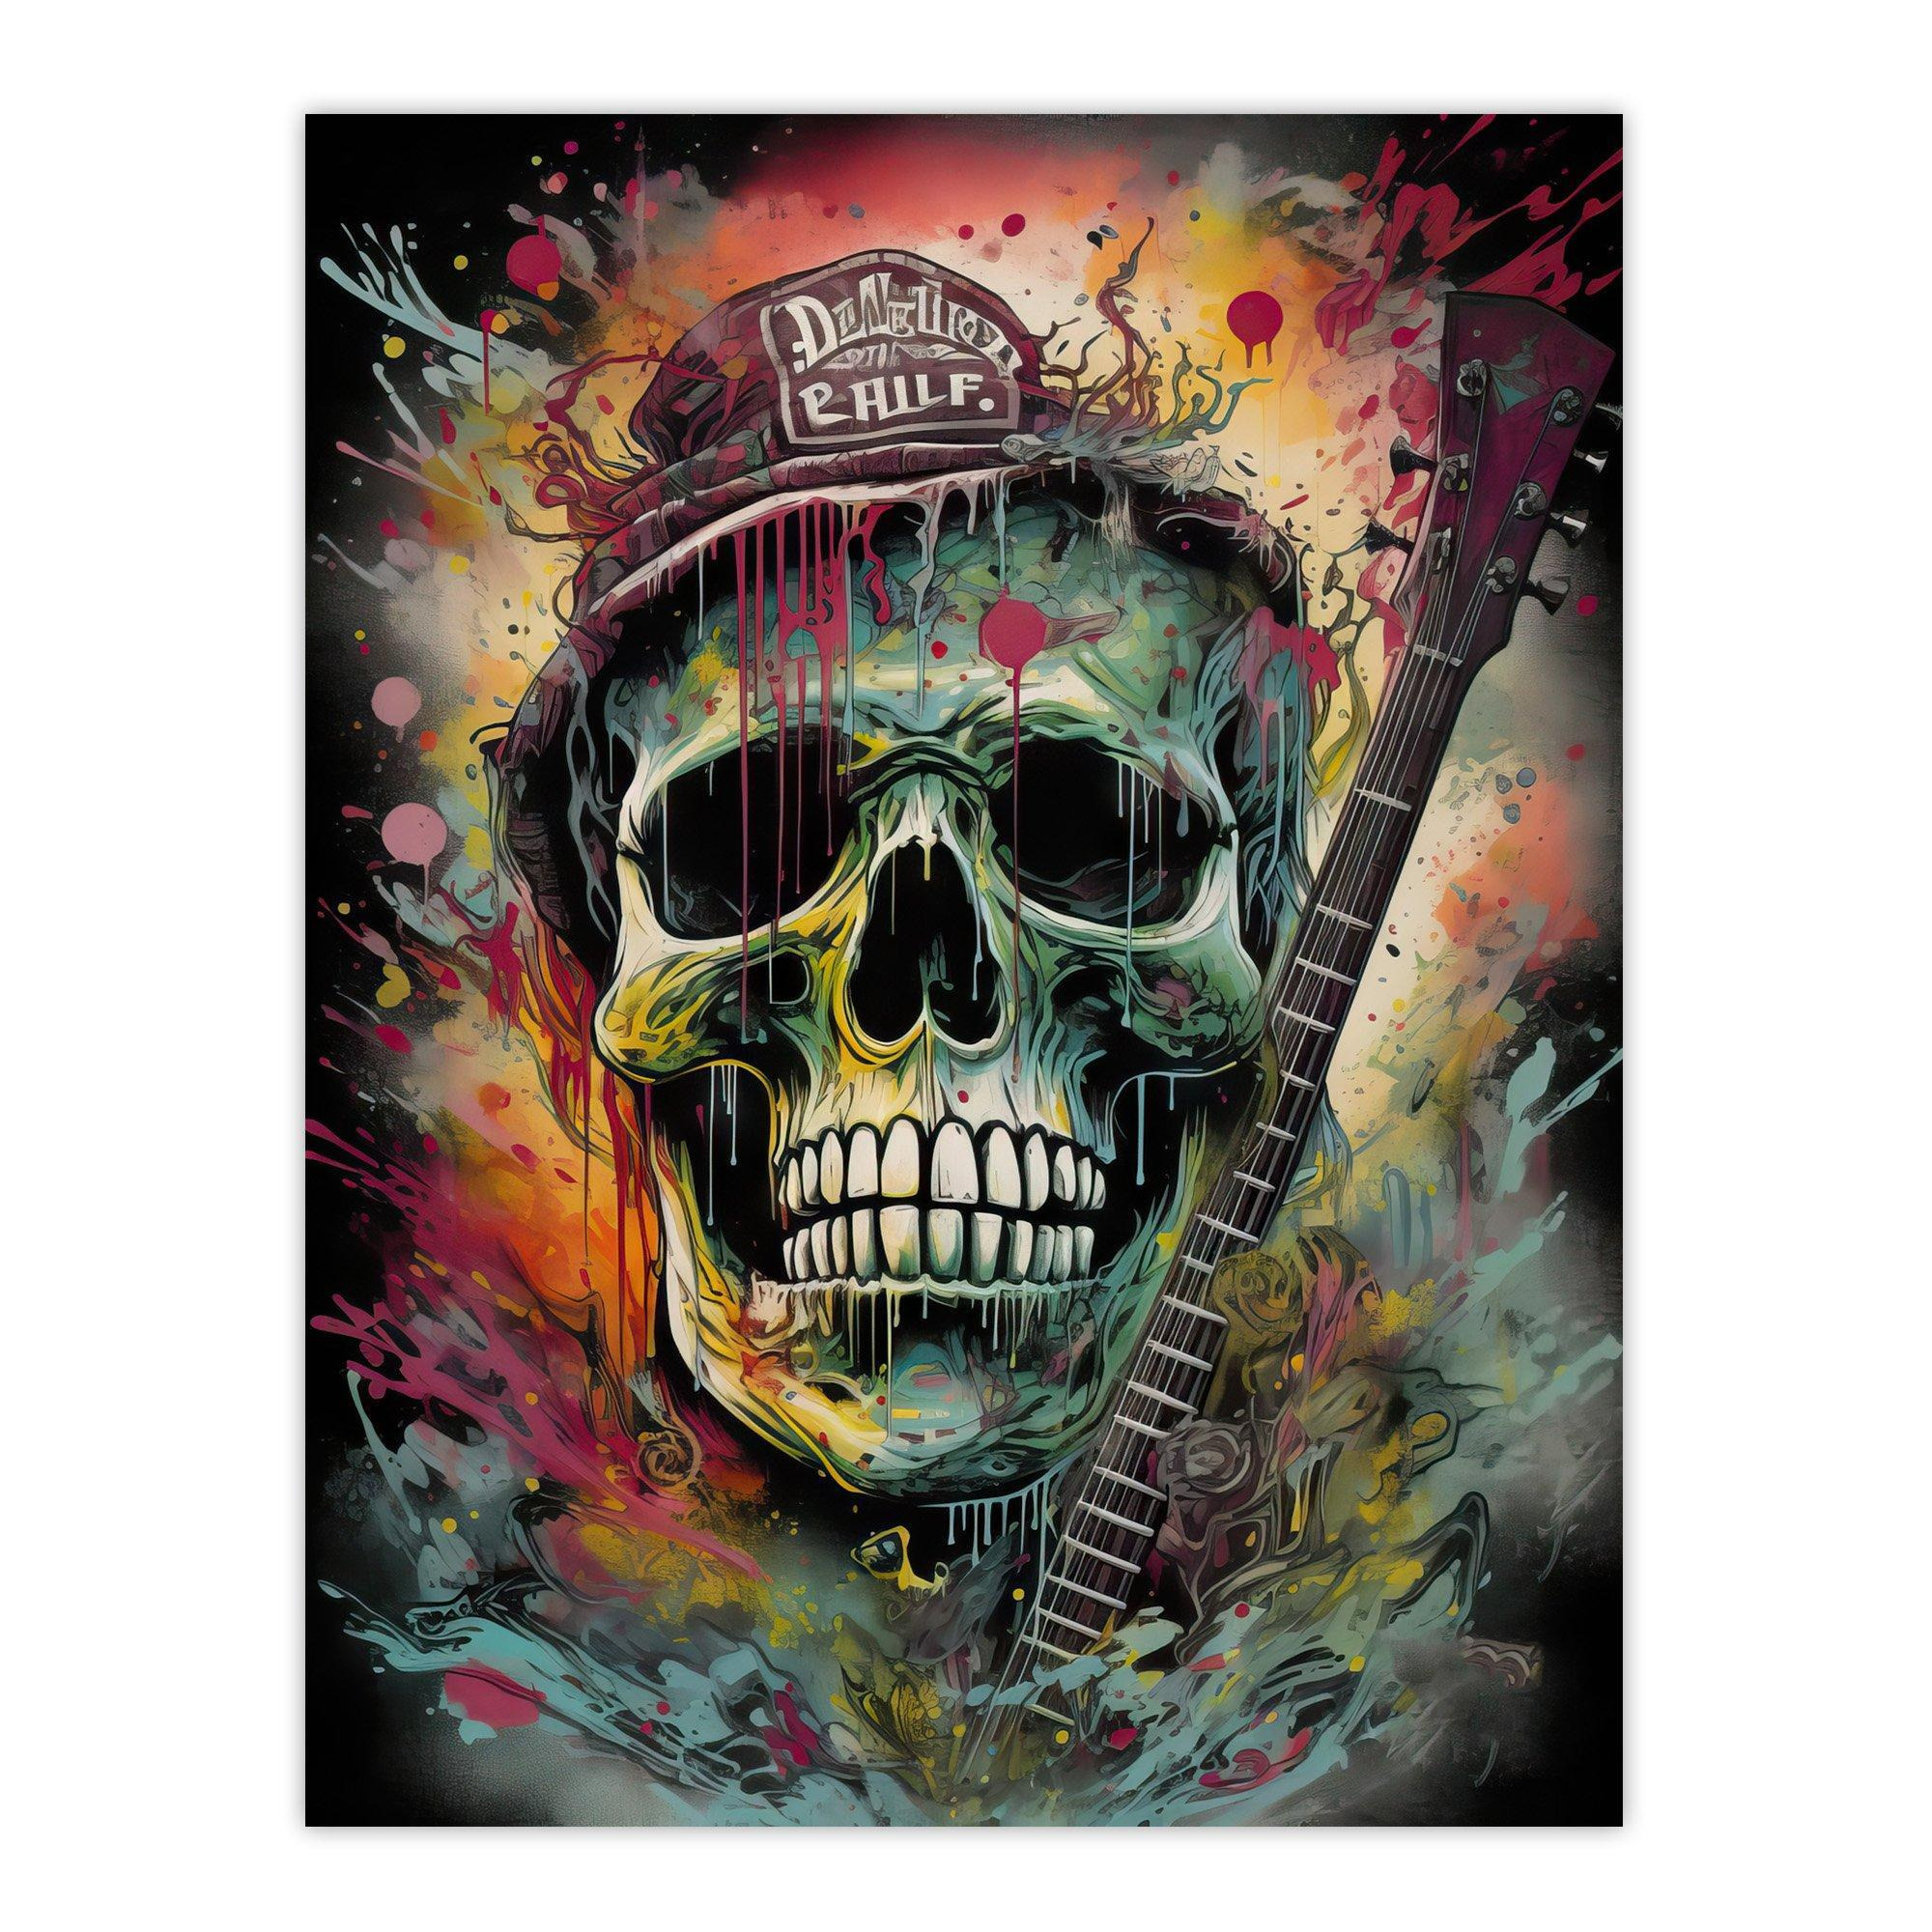 Hillbilly Music Artwork Rockabilly Country Metal Skull With Electric Guitar Vibrant Painting Unframed Wall Art Print Poster Home Decor Premium - image 1